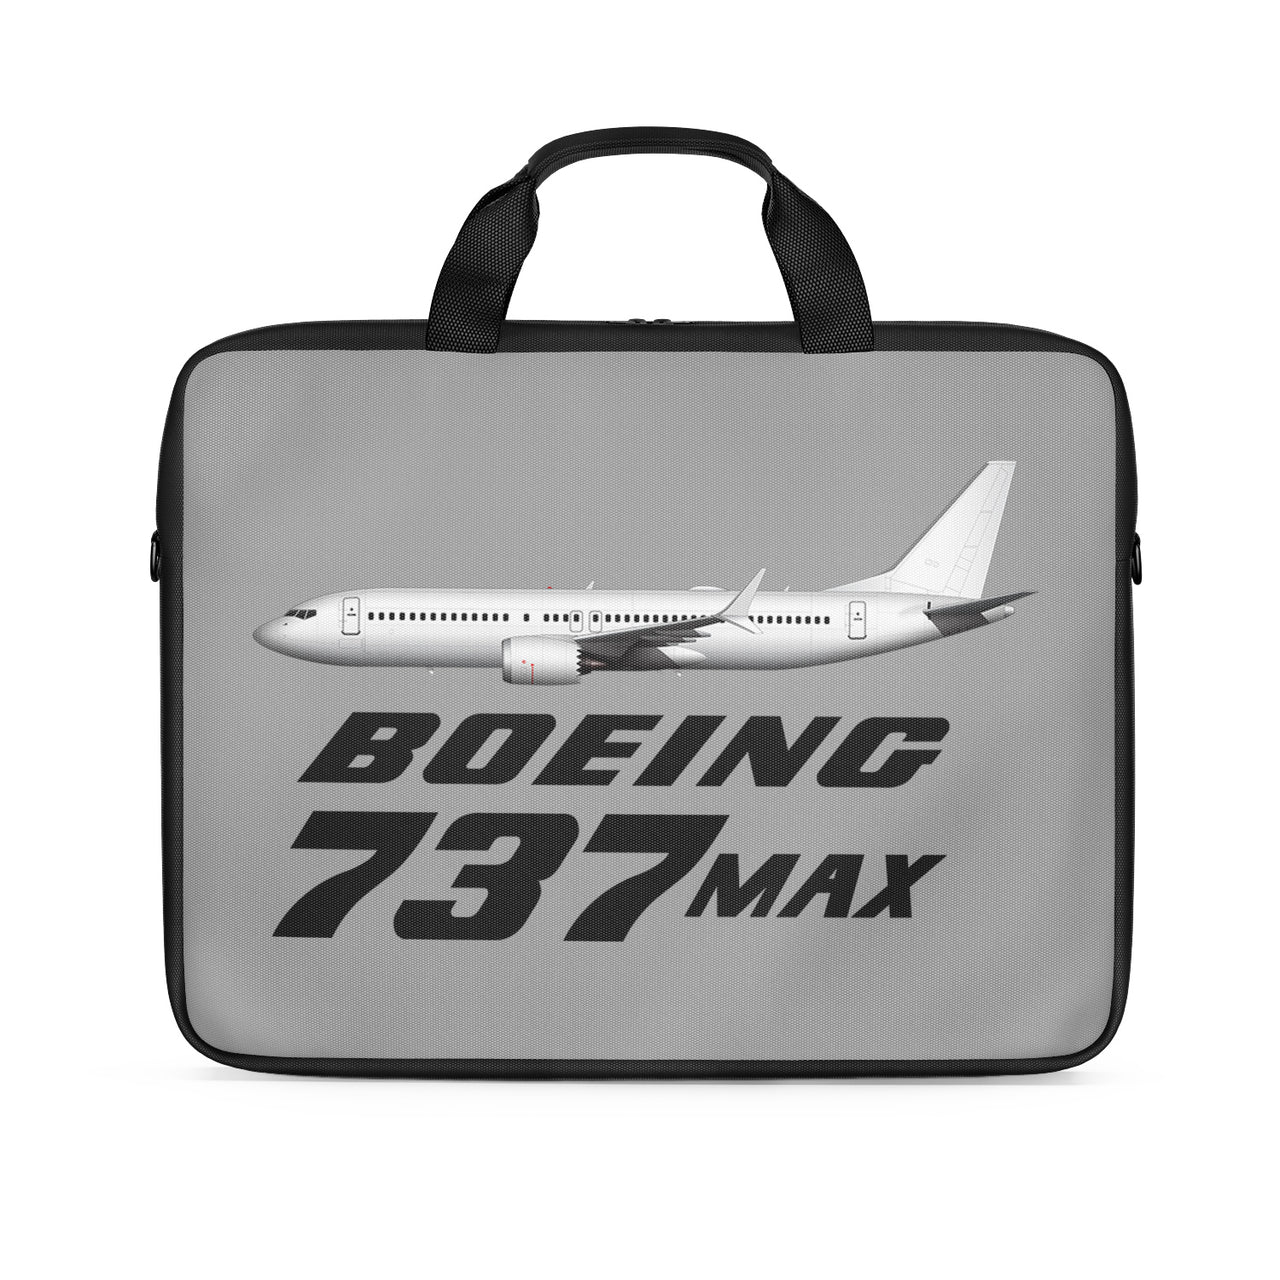 The Boeing 737Max Designed Laptop & Tablet Bags